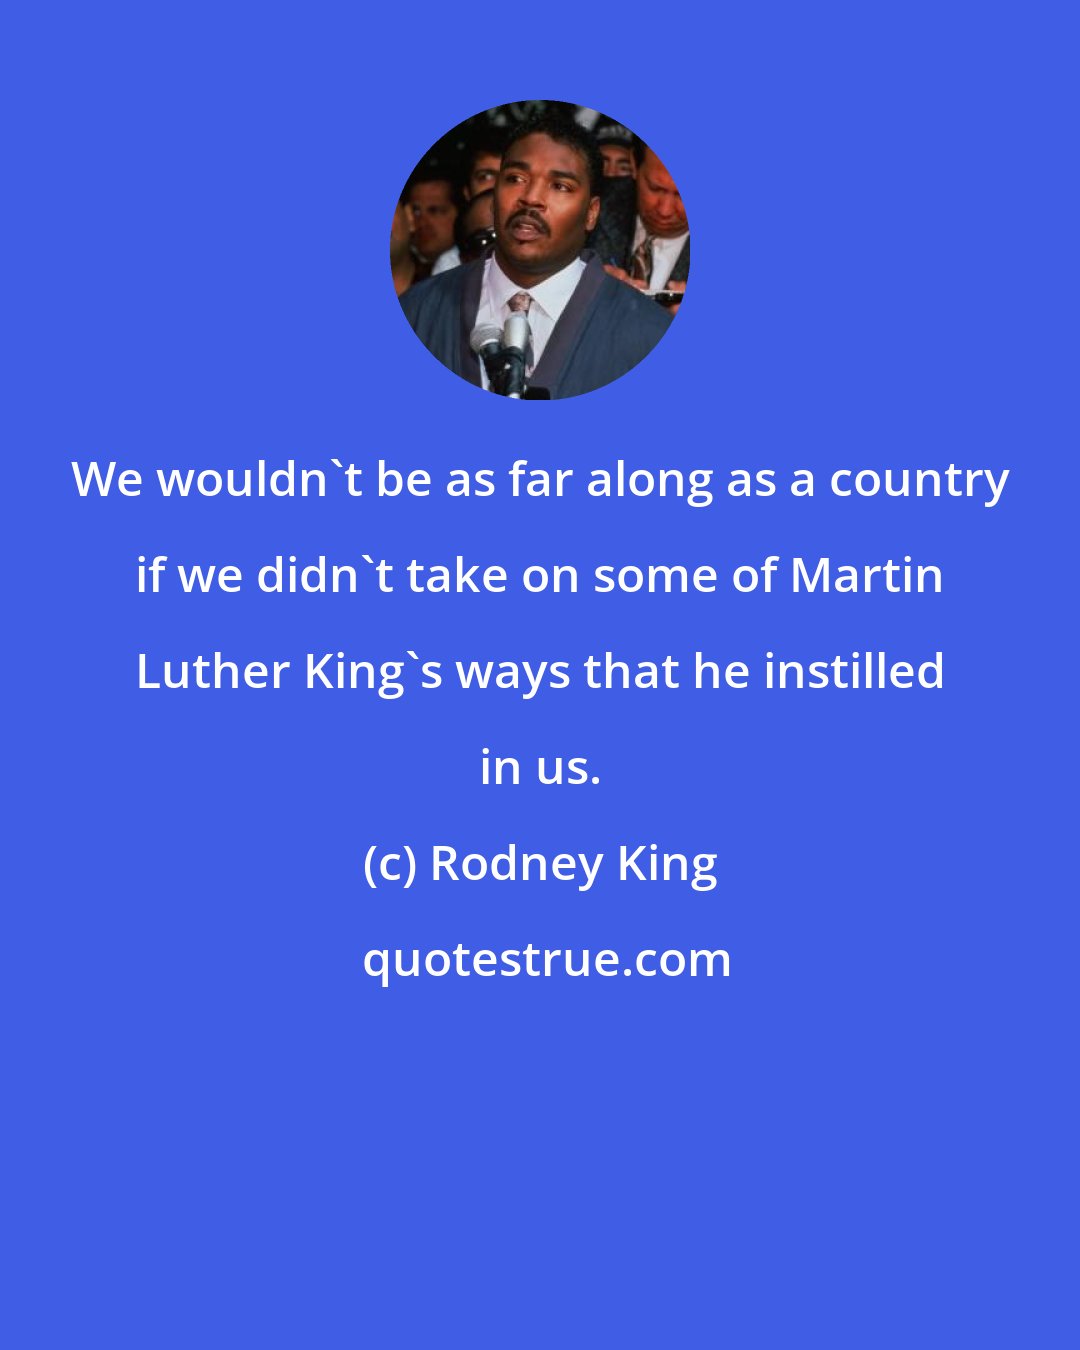 Rodney King: We wouldn't be as far along as a country if we didn't take on some of Martin Luther King's ways that he instilled in us.